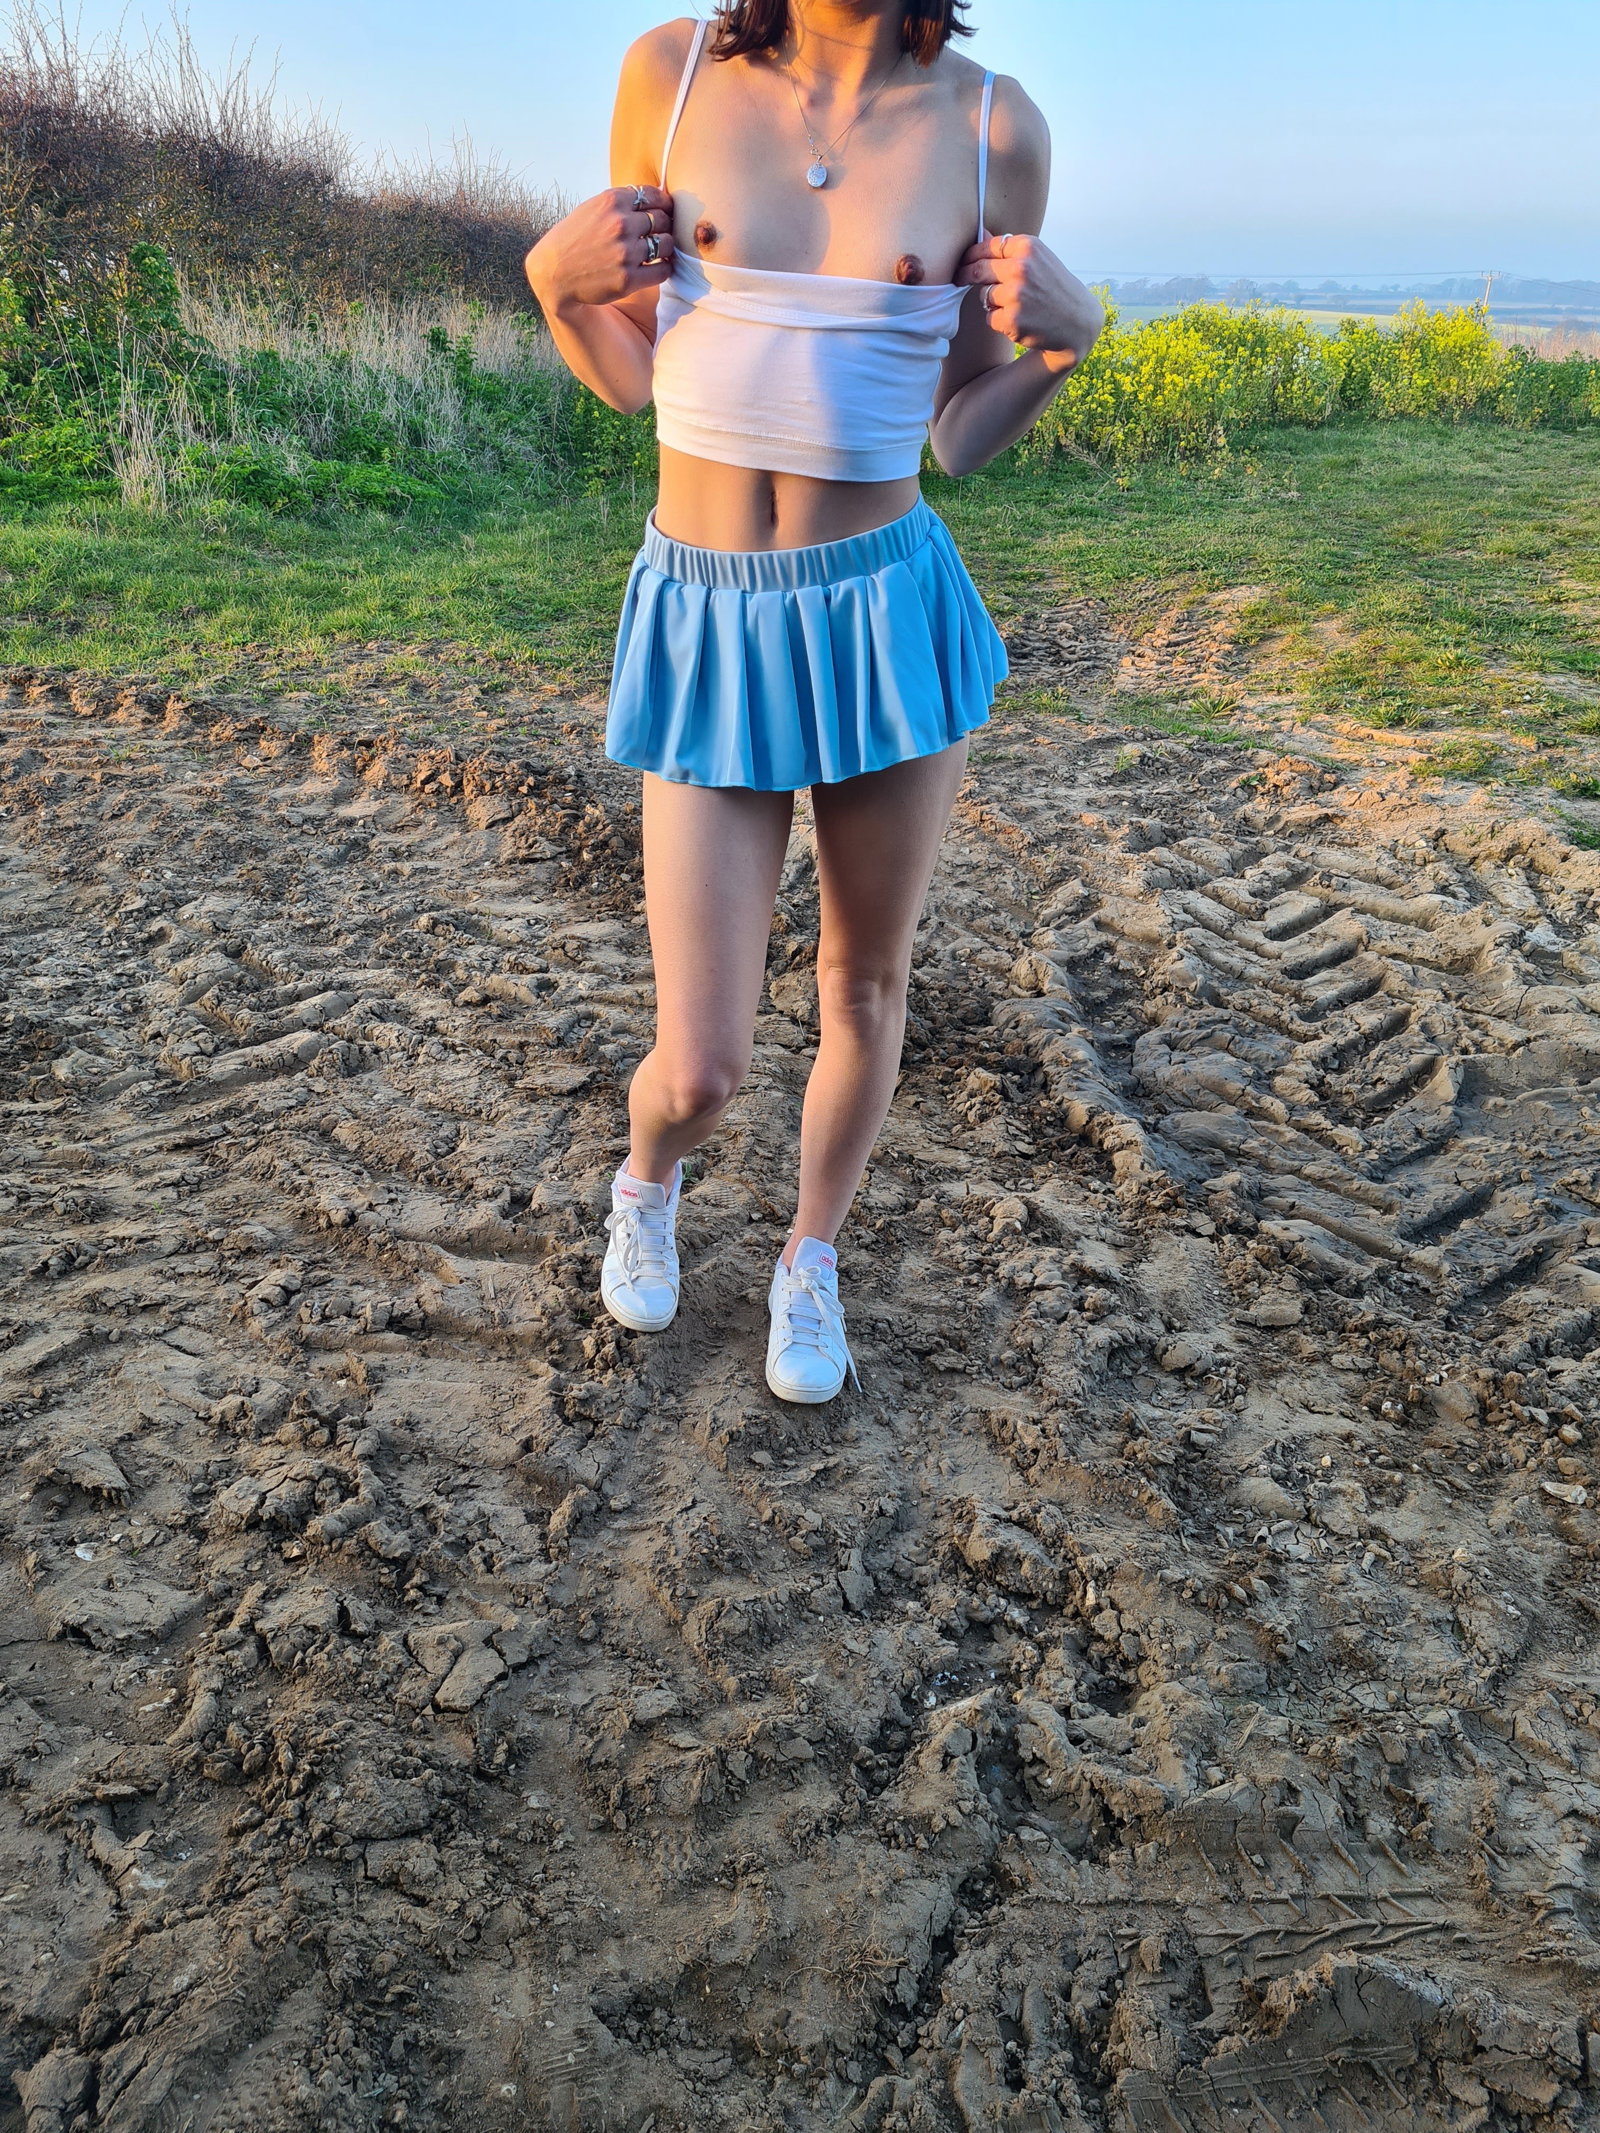 Photo by Kate with the username @bunnygirl26, who is a verified user, posted on April 2, 2022. The post is about the topic Teen and the text says 'is my skirt a bit to short?? 💋💋'